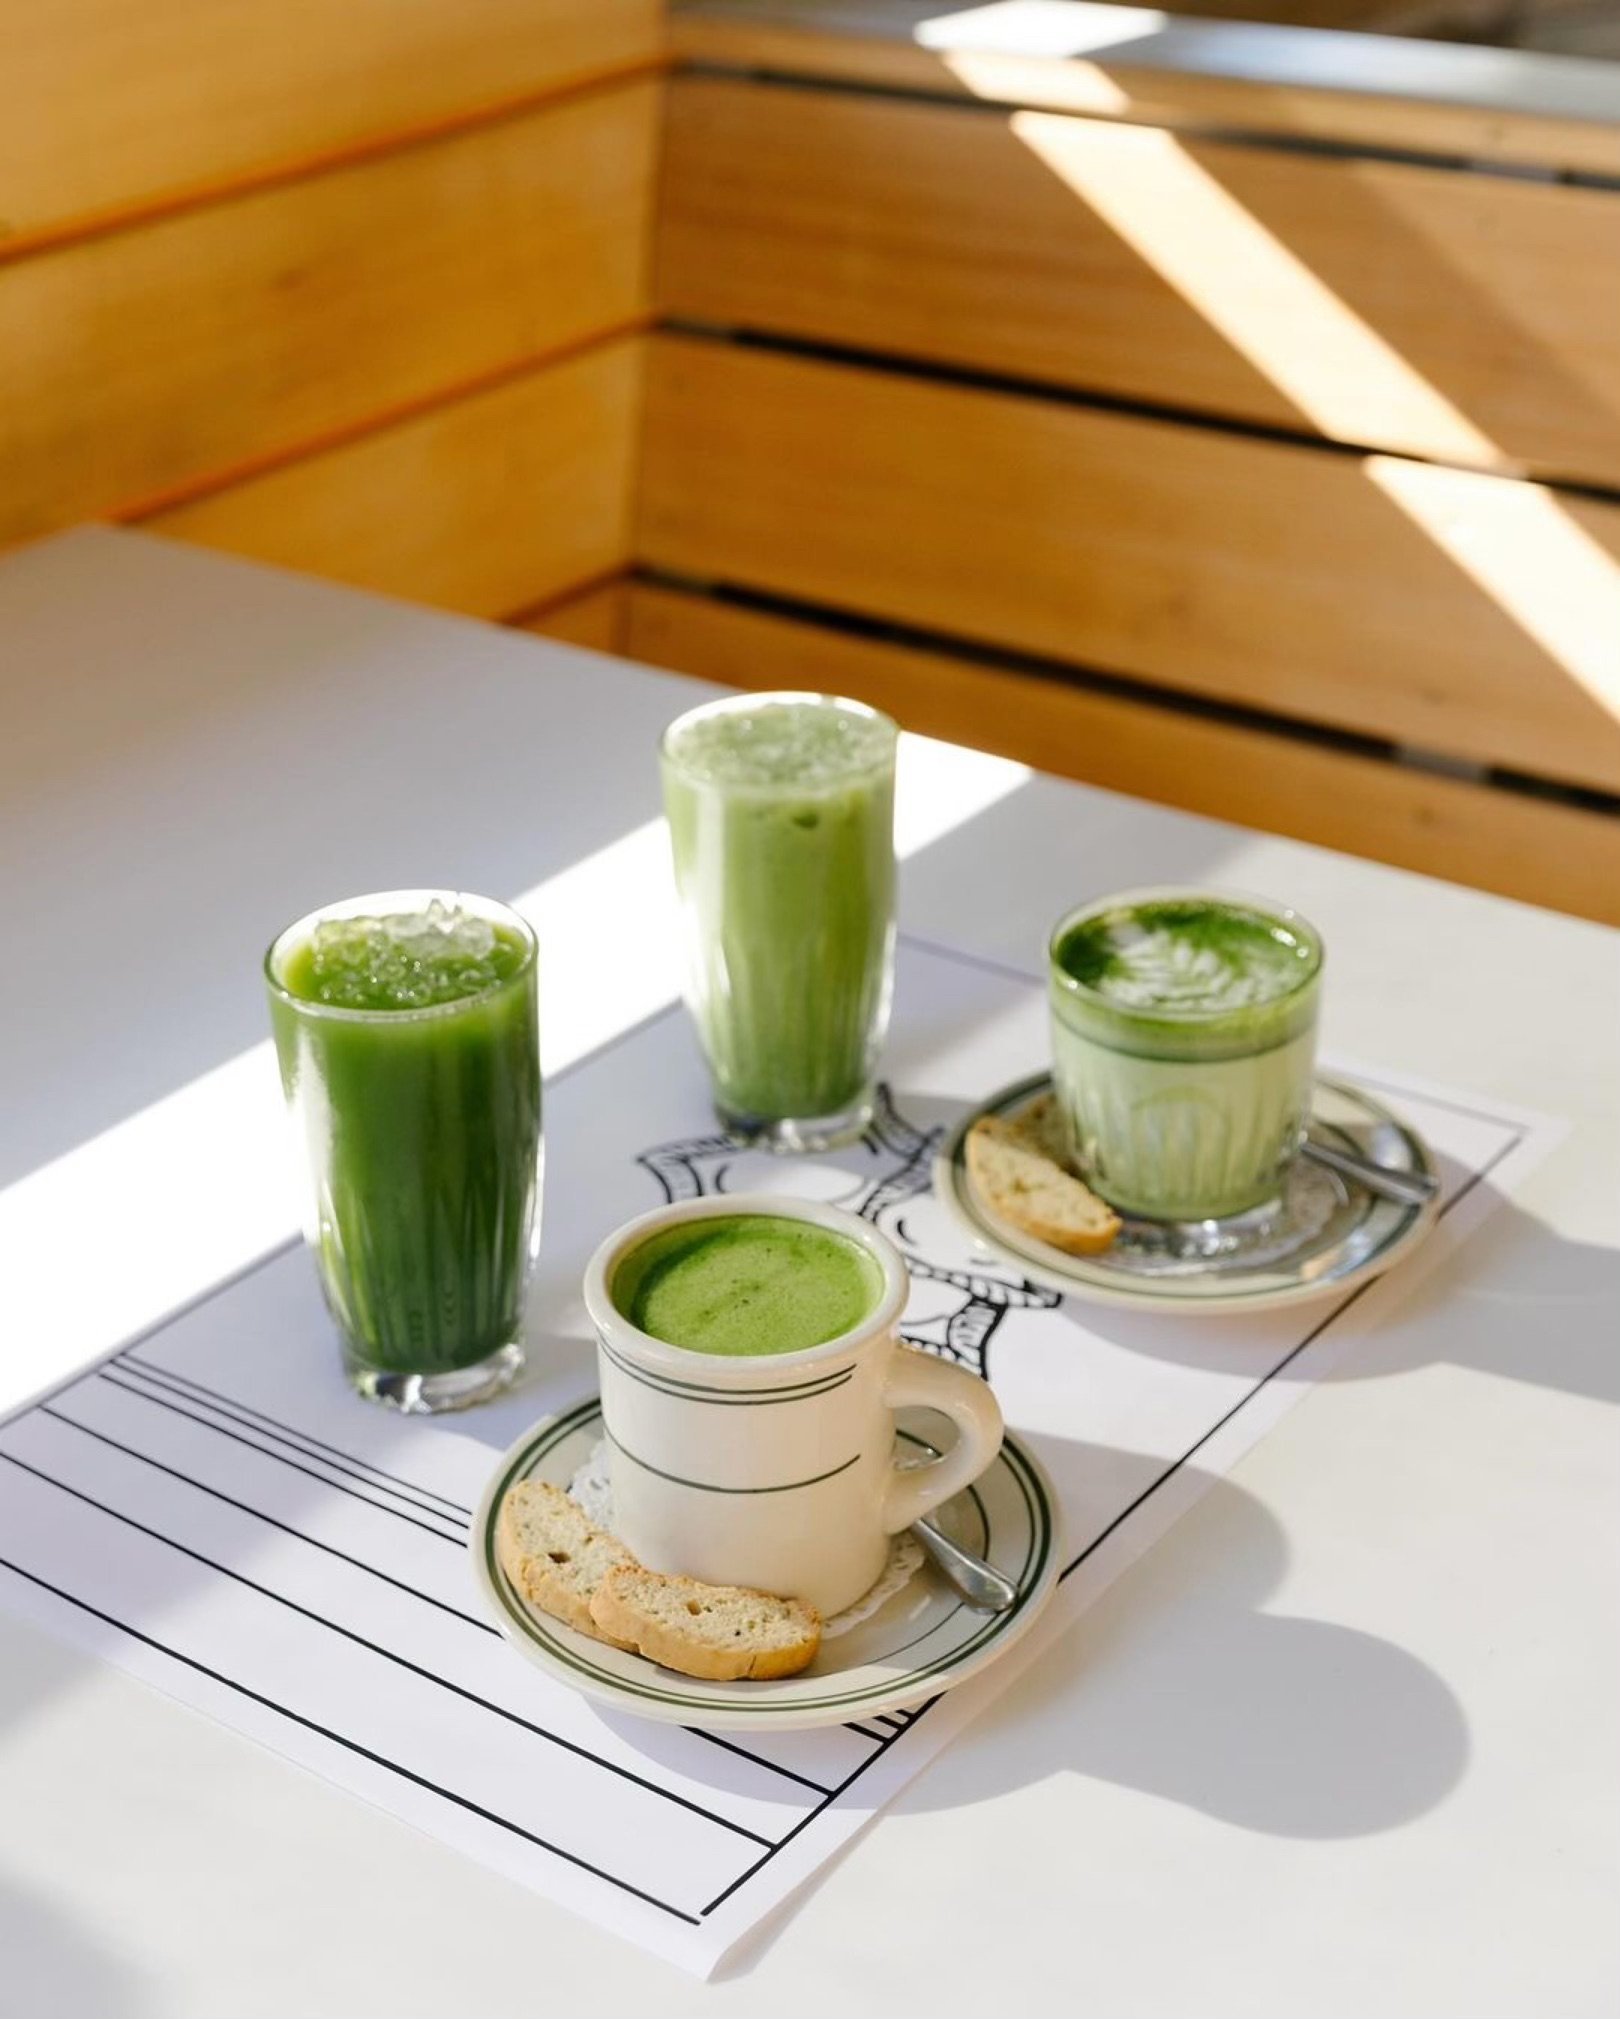 Matcha, a decade on: the distinctive, caffeinated green powder isn’t going anywhere. Pictured: drinks at Los Angeles’ Rocky’s Matcha. Photos: Handout